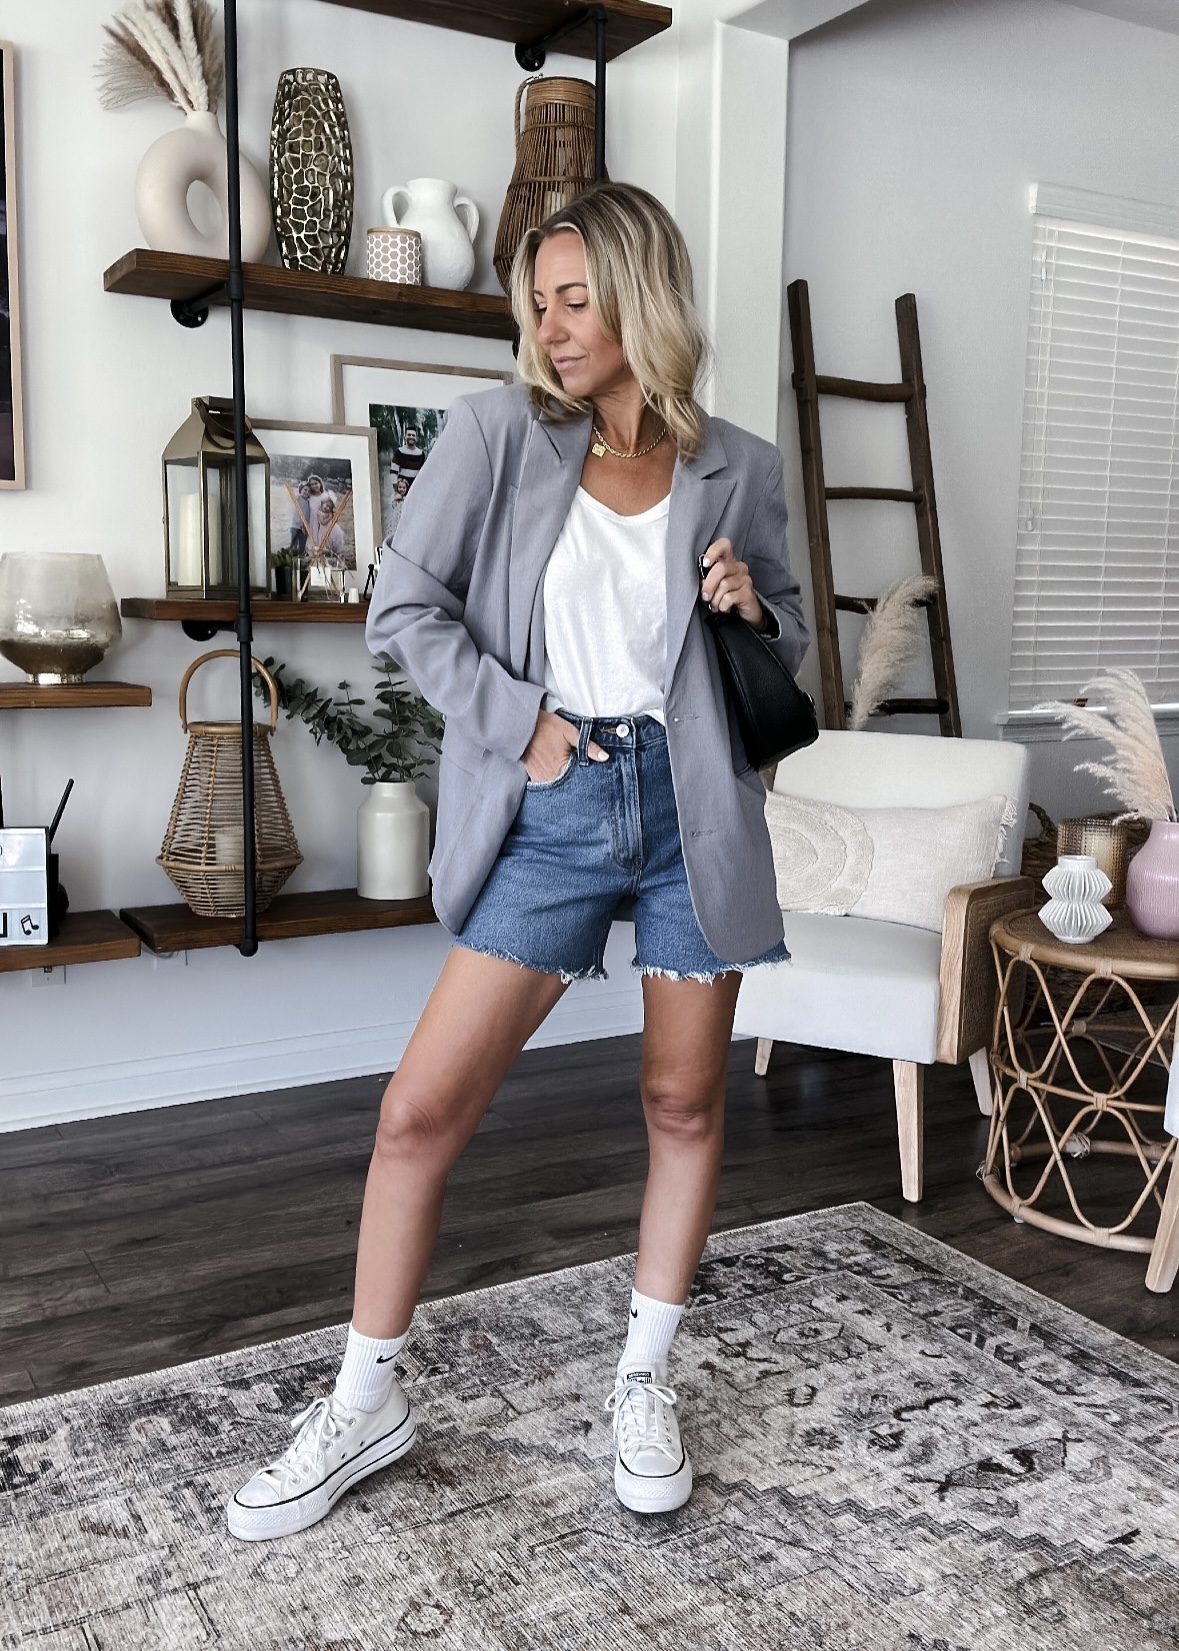 Styling the dad shorts for everyday-Jaclyn De Leon style. The Abercrombie dad shorts are by far by favorite shorts. If you love the 90s fit jeans then these shorts are for you. They come in tons of washes and even faux leather.